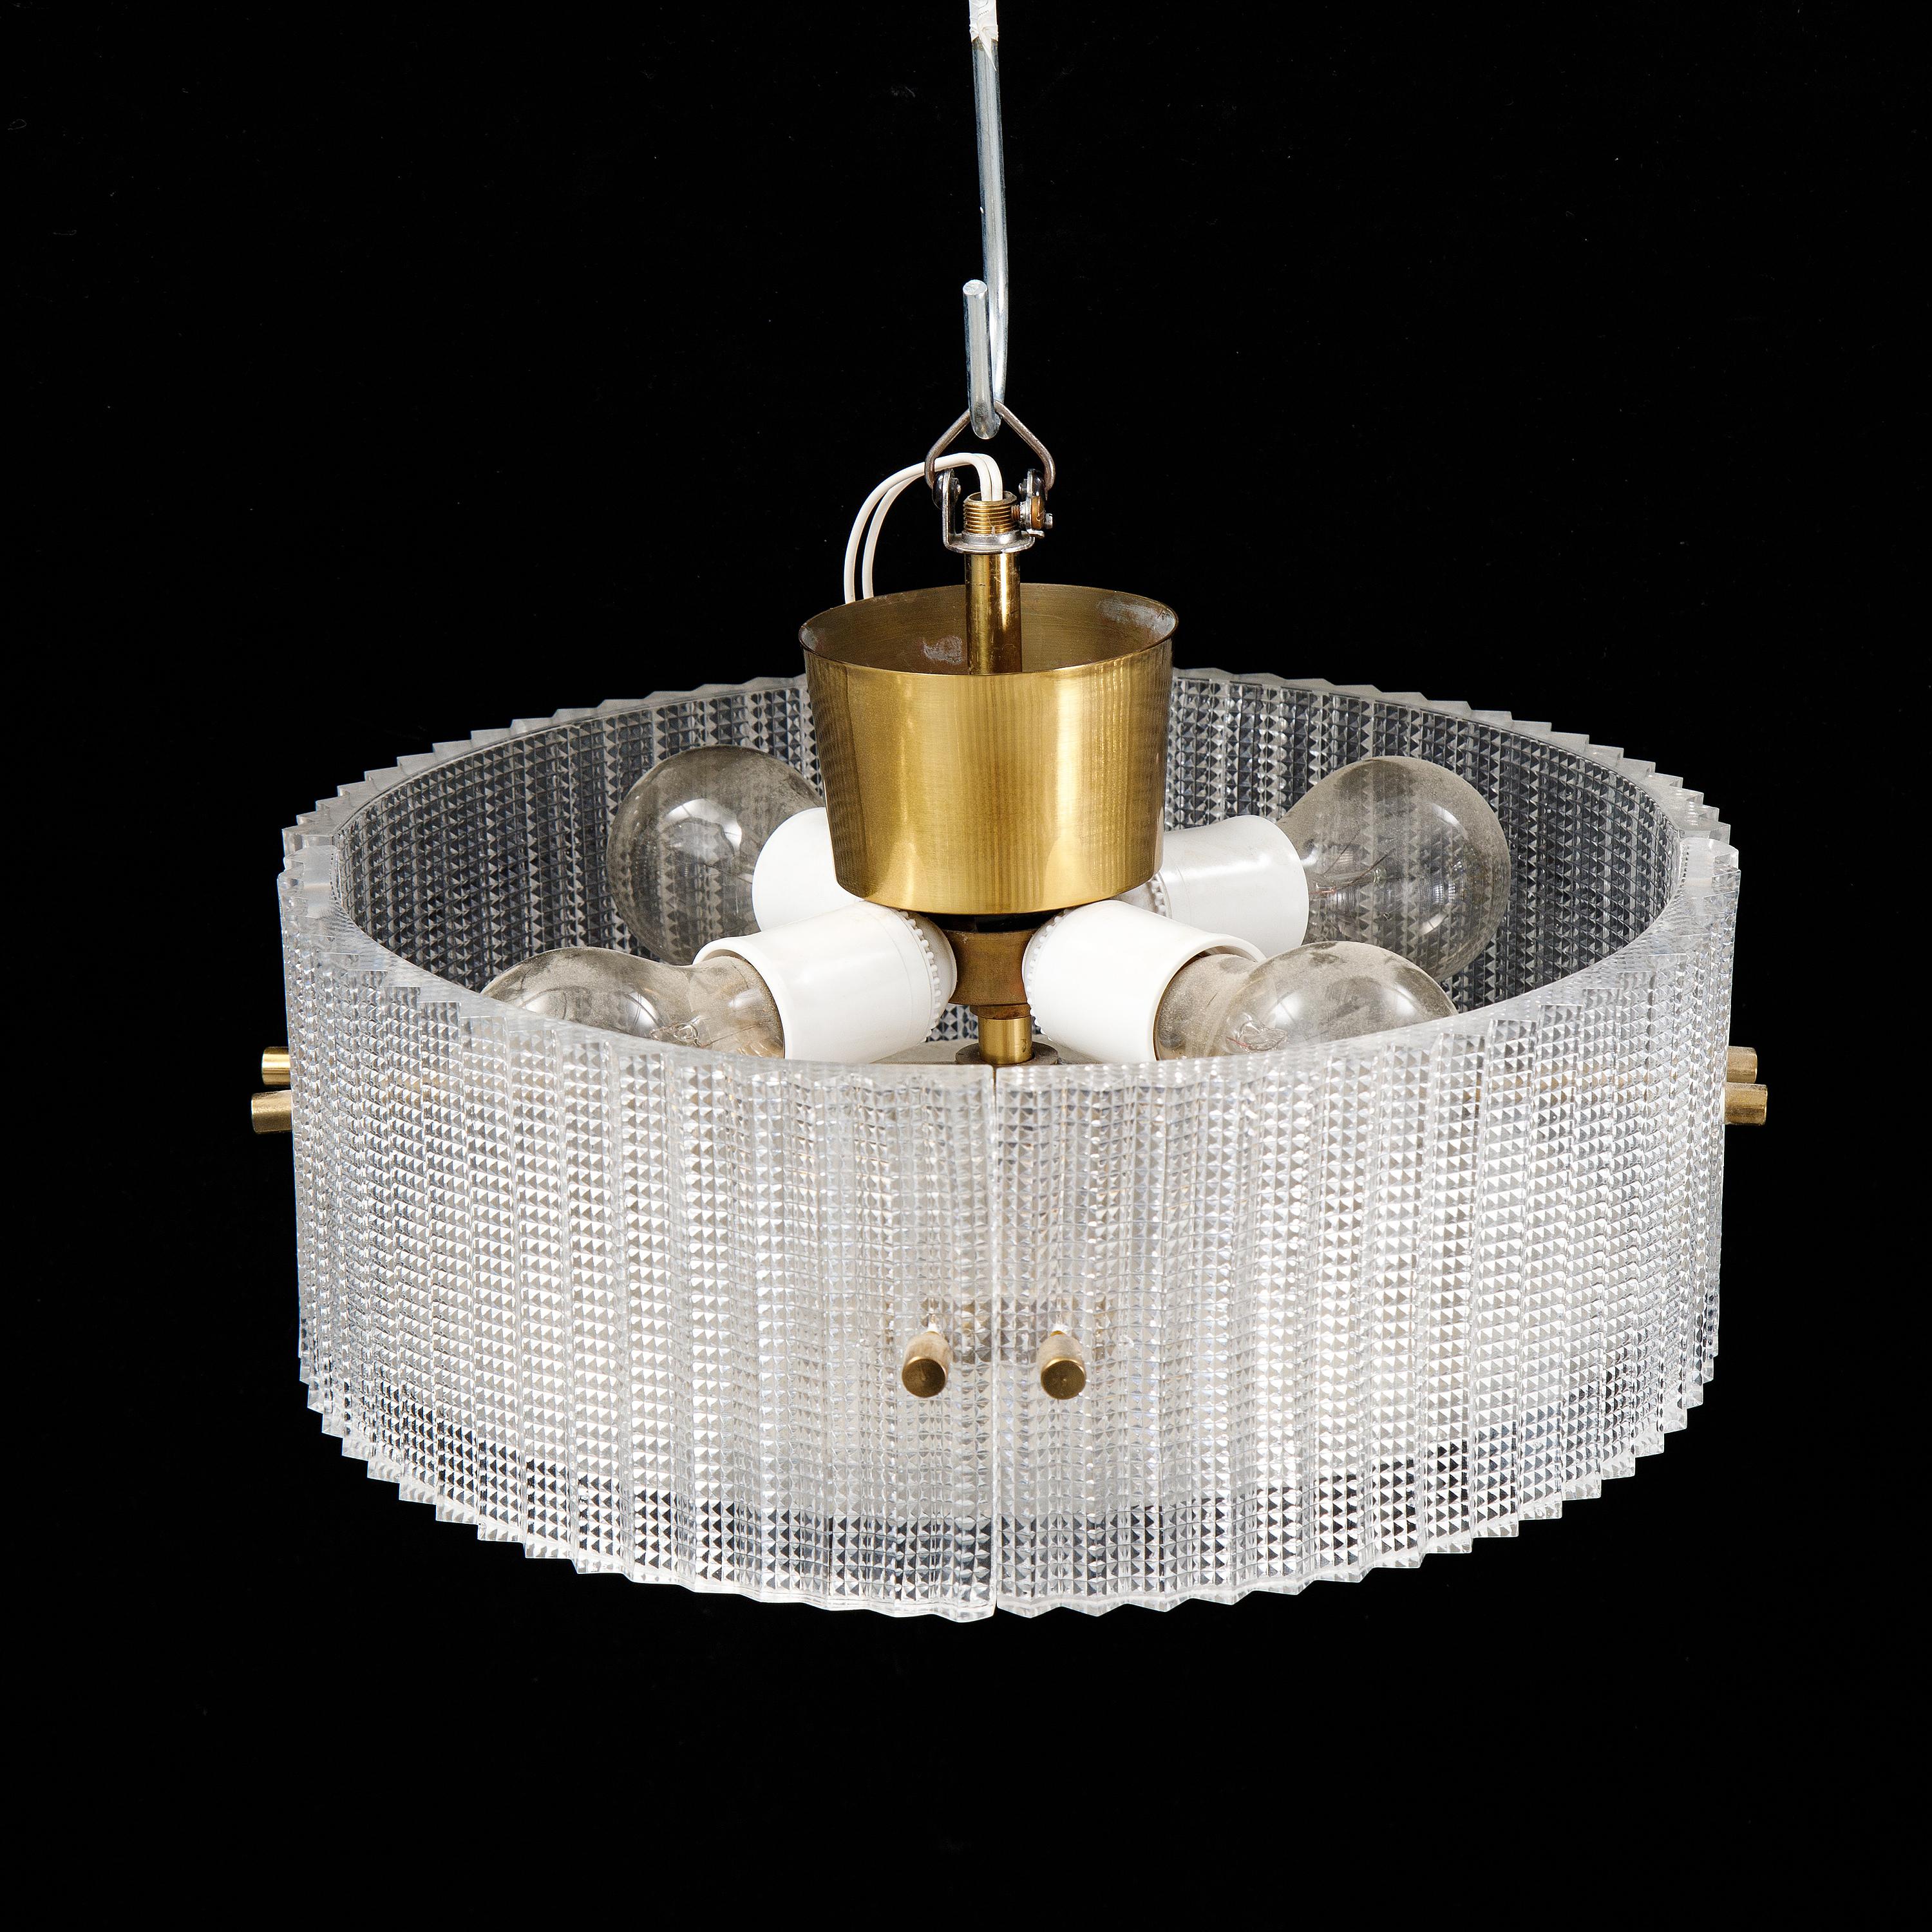 Carl Fagerlund ceiling light for Orrefors made in Sweden 1960
Model made of Glass mounted on a brass structure with beautiful details
Good condition 
A pair is available price for 1 item

Many museums, churches and corporate headquarters house